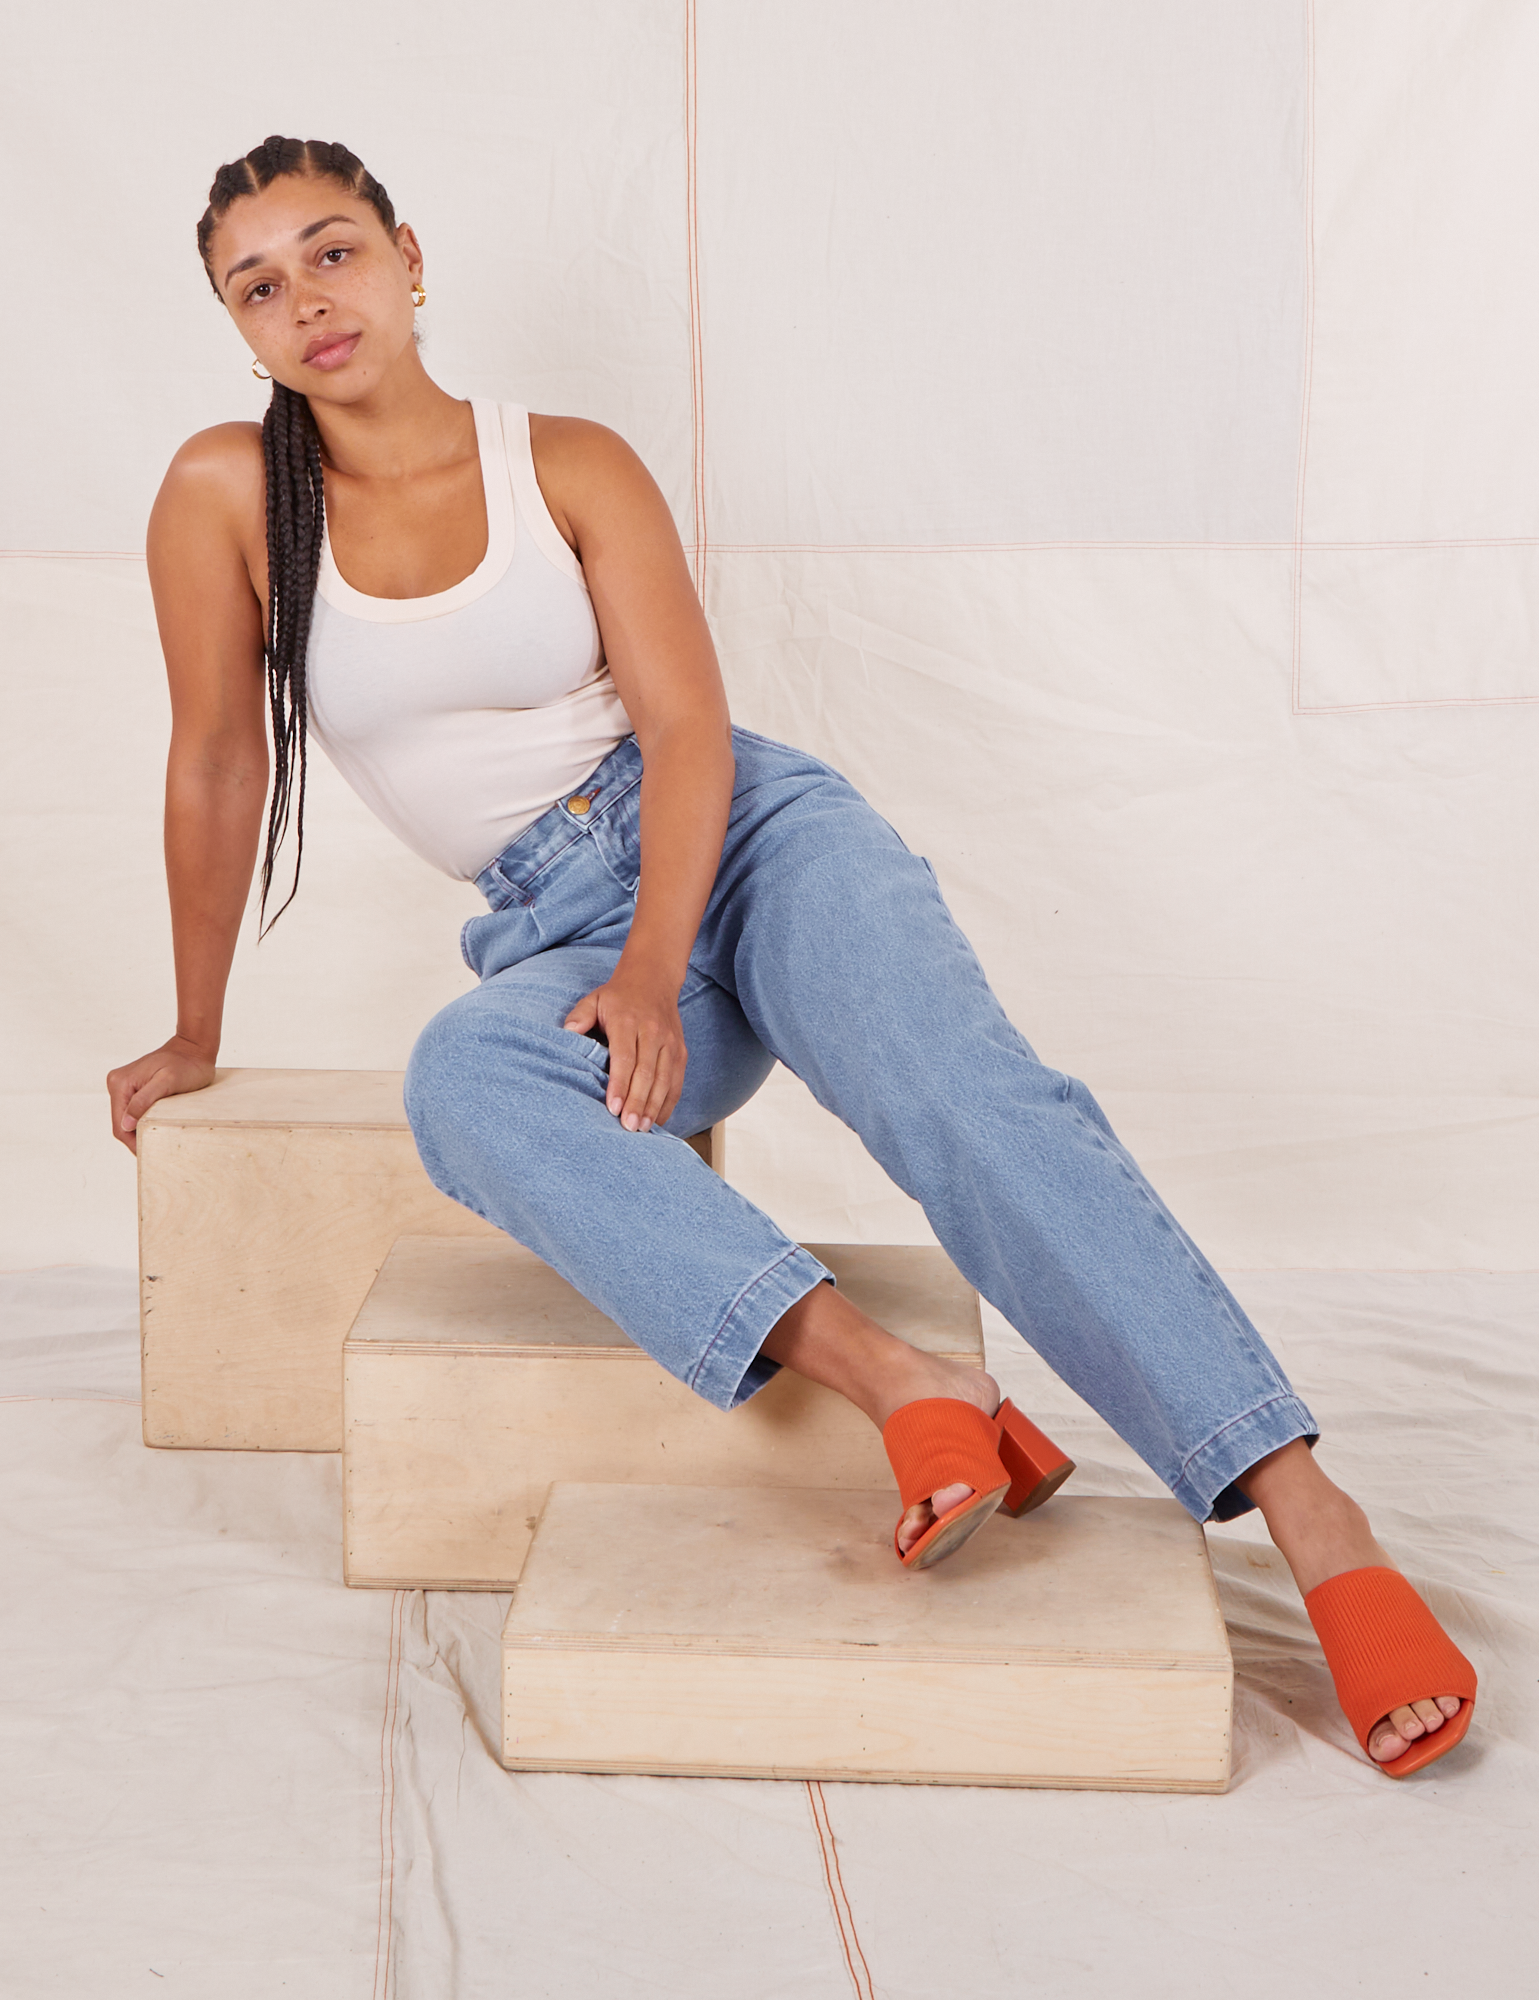 Gabi is sitting on a wooden crate wearing Denim Trouser Jeans in Light Wash and vintage off-white Tank Top